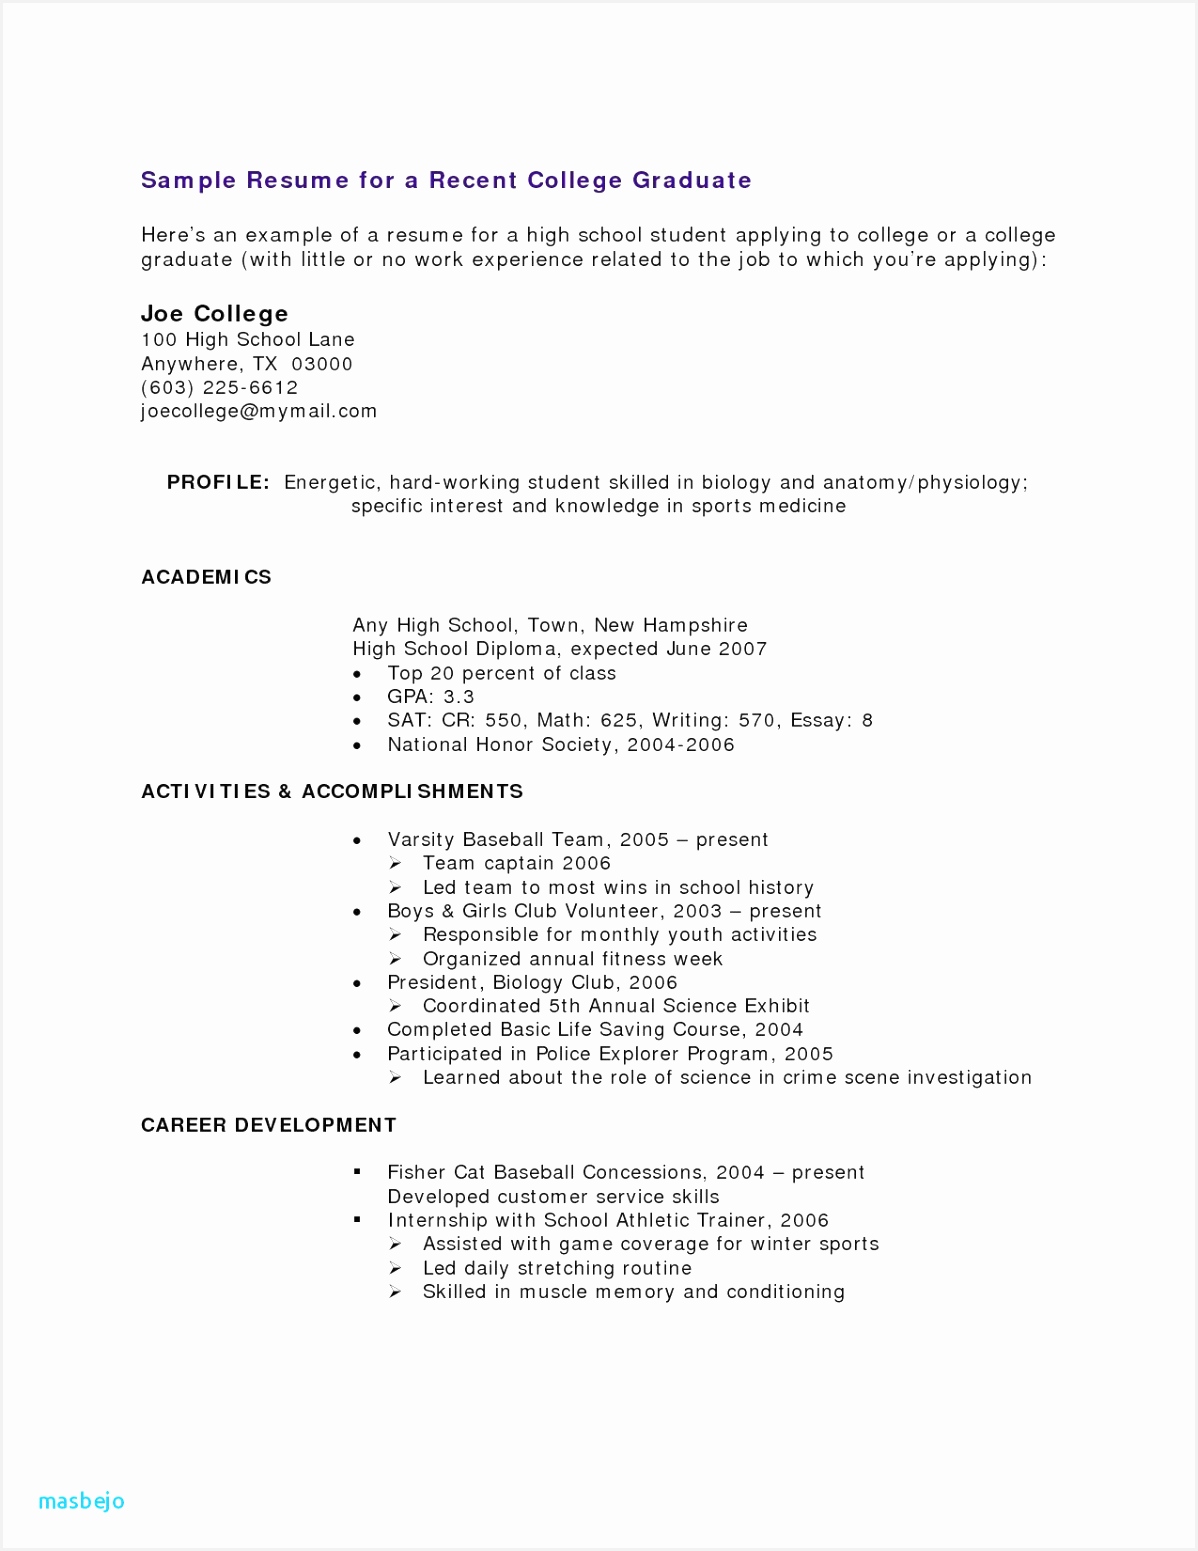 Download Teen Resume Examples with original resolution Here 155111985nYki